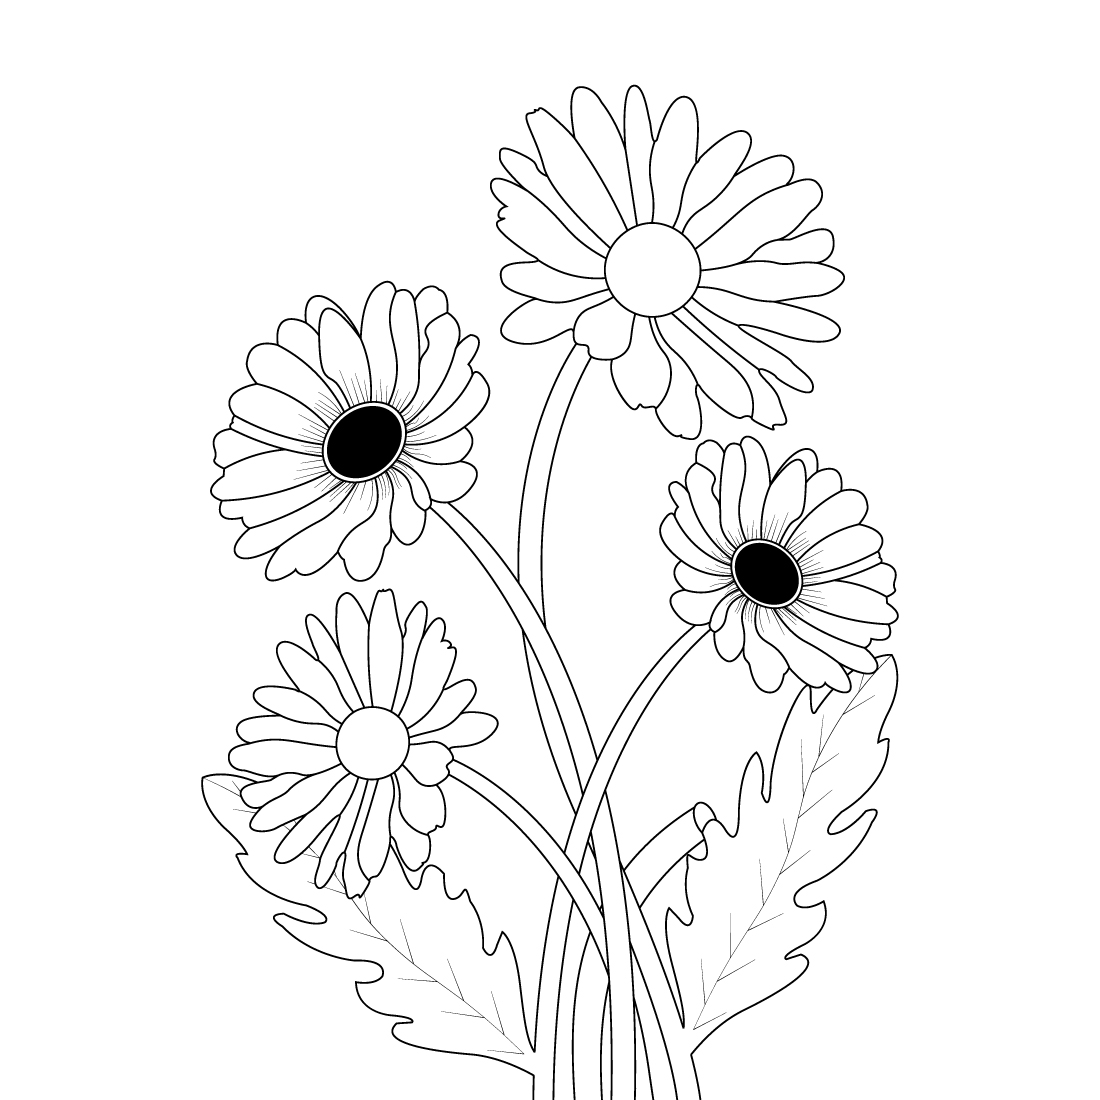 hand Drawn Daisy Flower Coloring Page cover image.